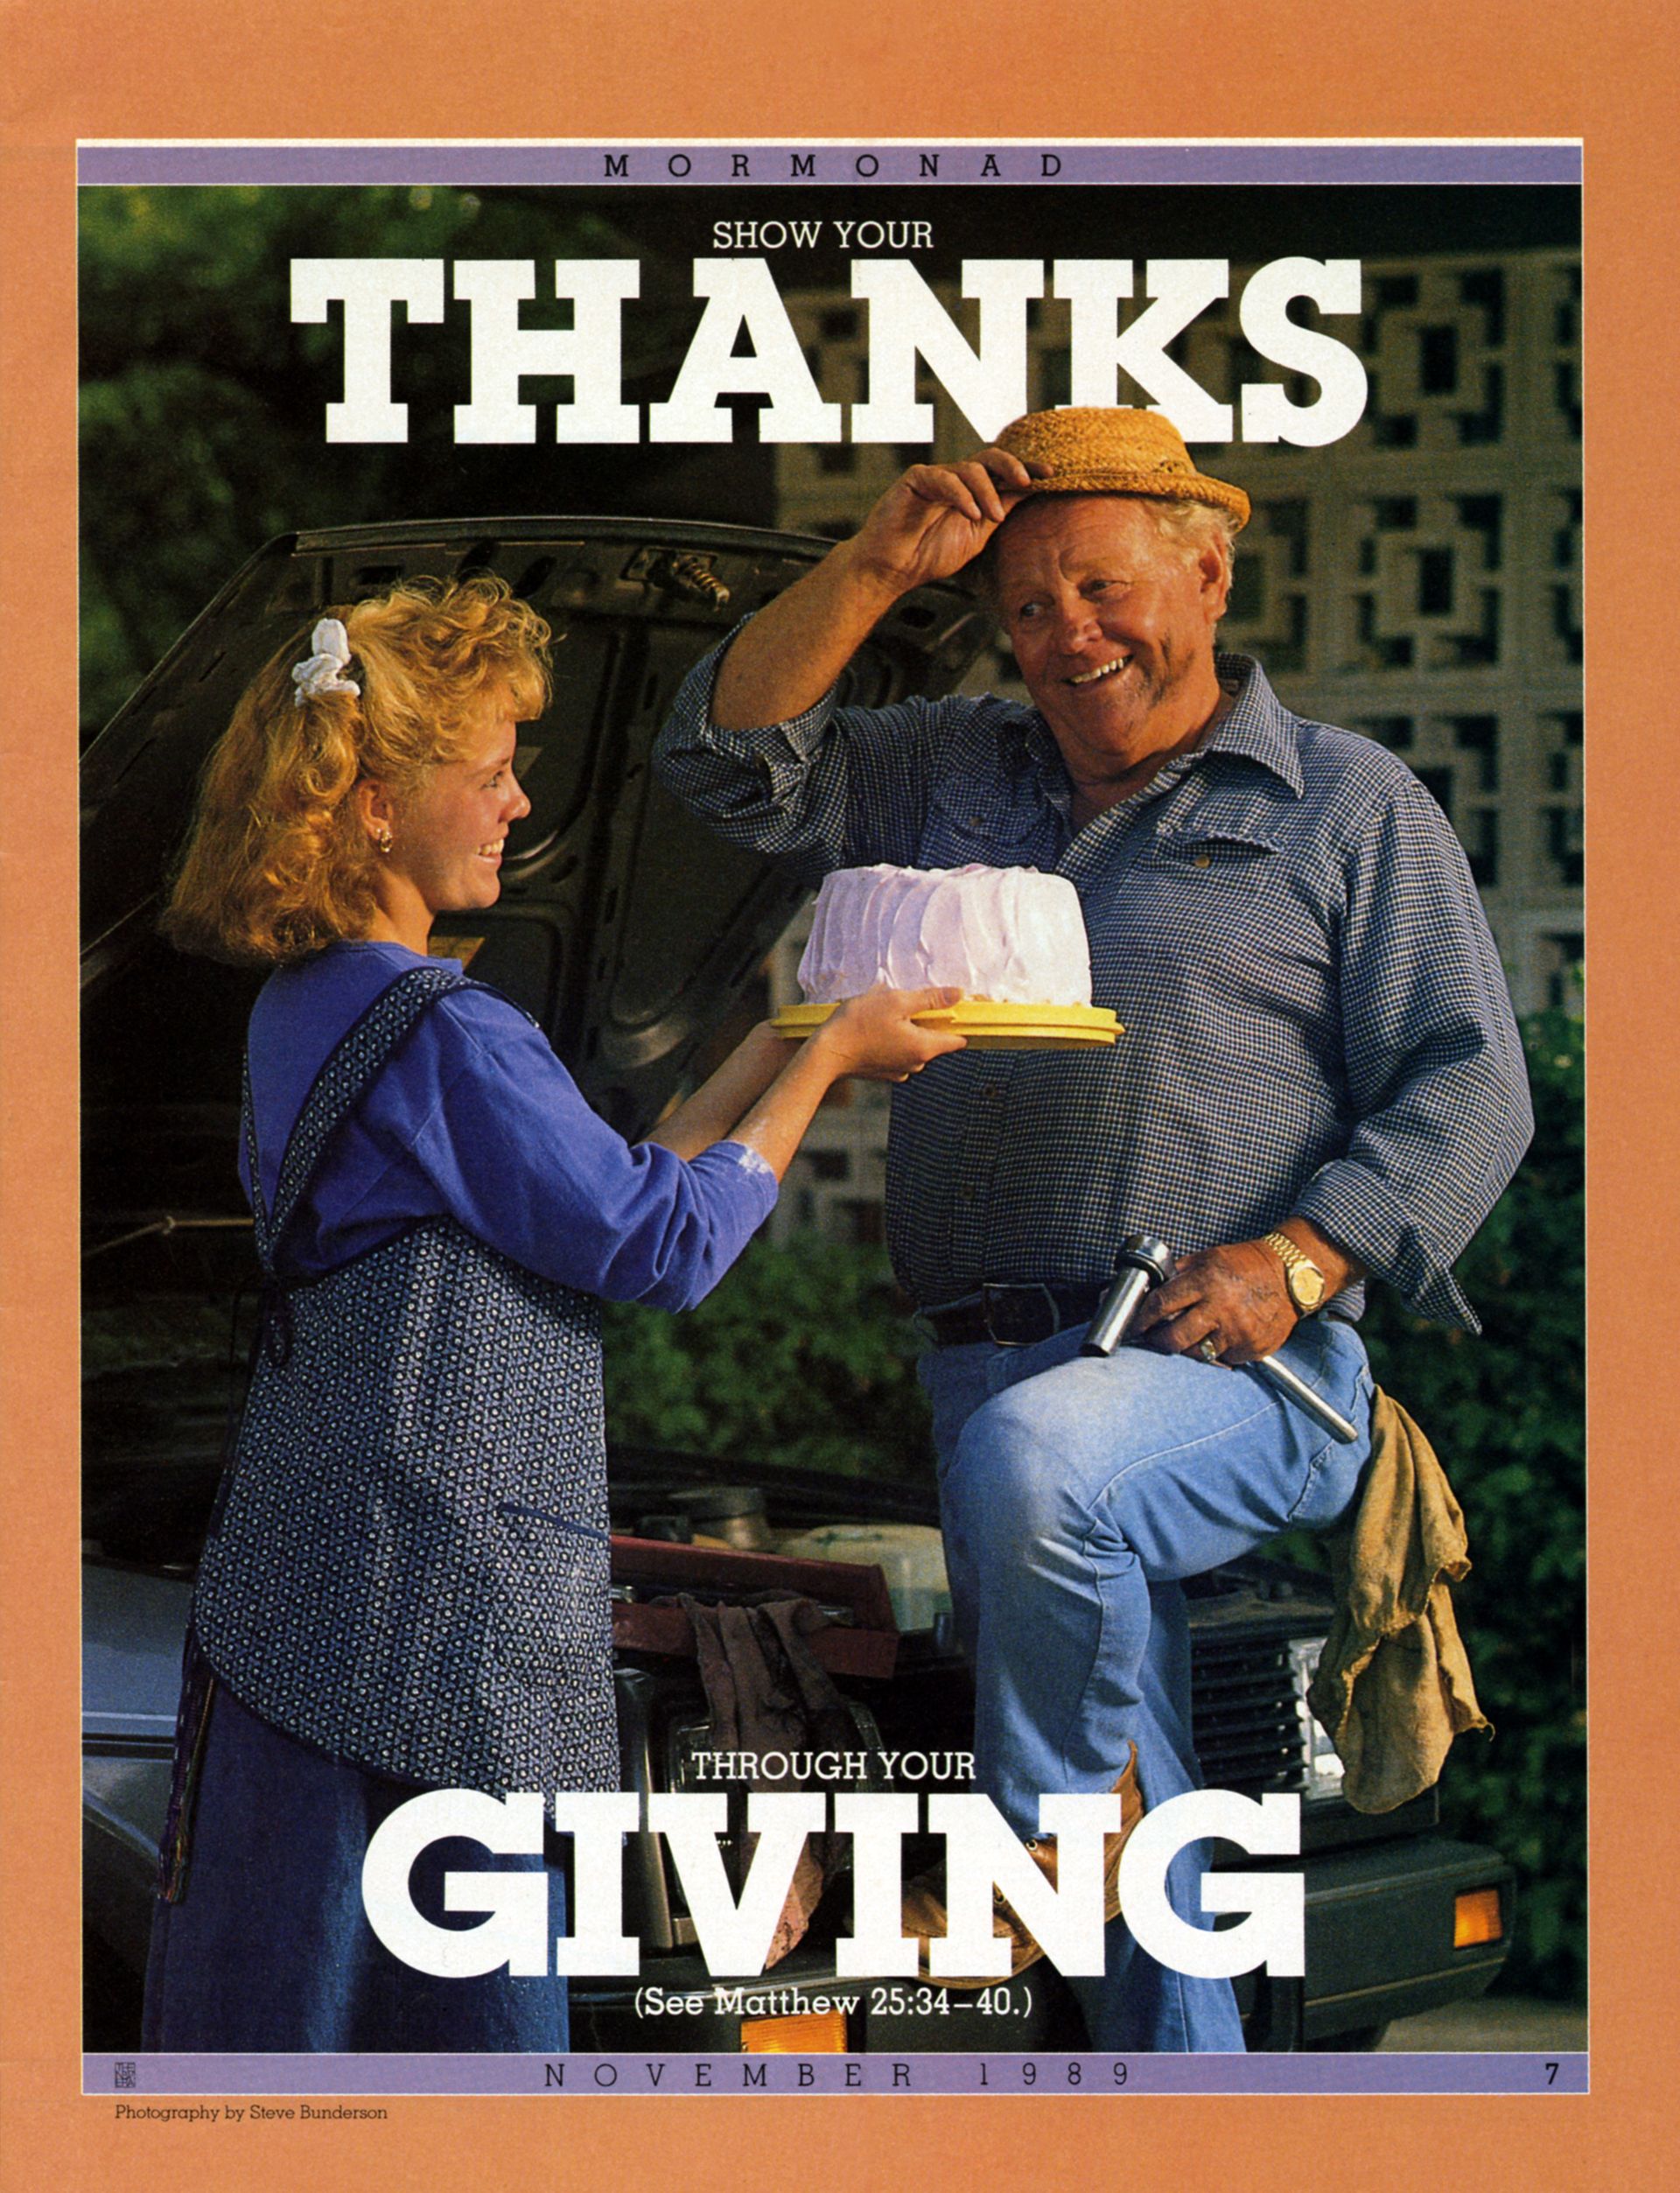 Show Your Thanks through Your Giving. (See Matthew 25:34–40.) Nov. 1989 © undefined ipCode 1.